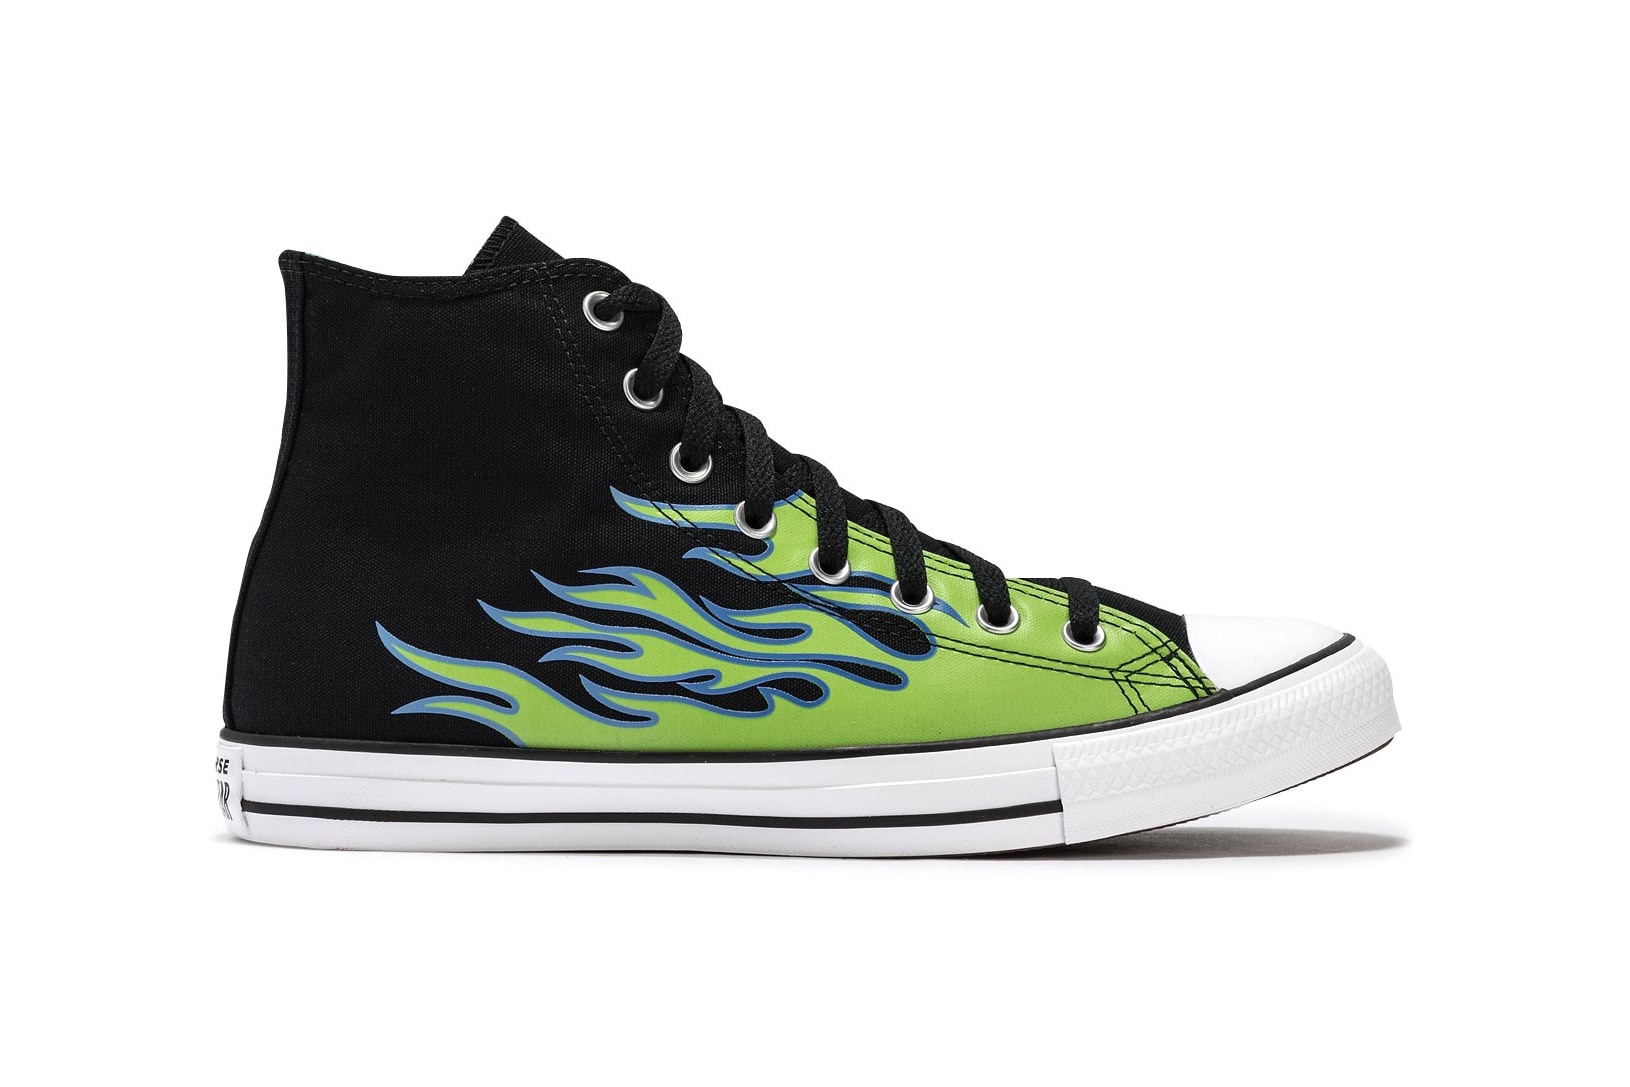 Converse Adds Neon Green Flames To Chuck Taylor All Star